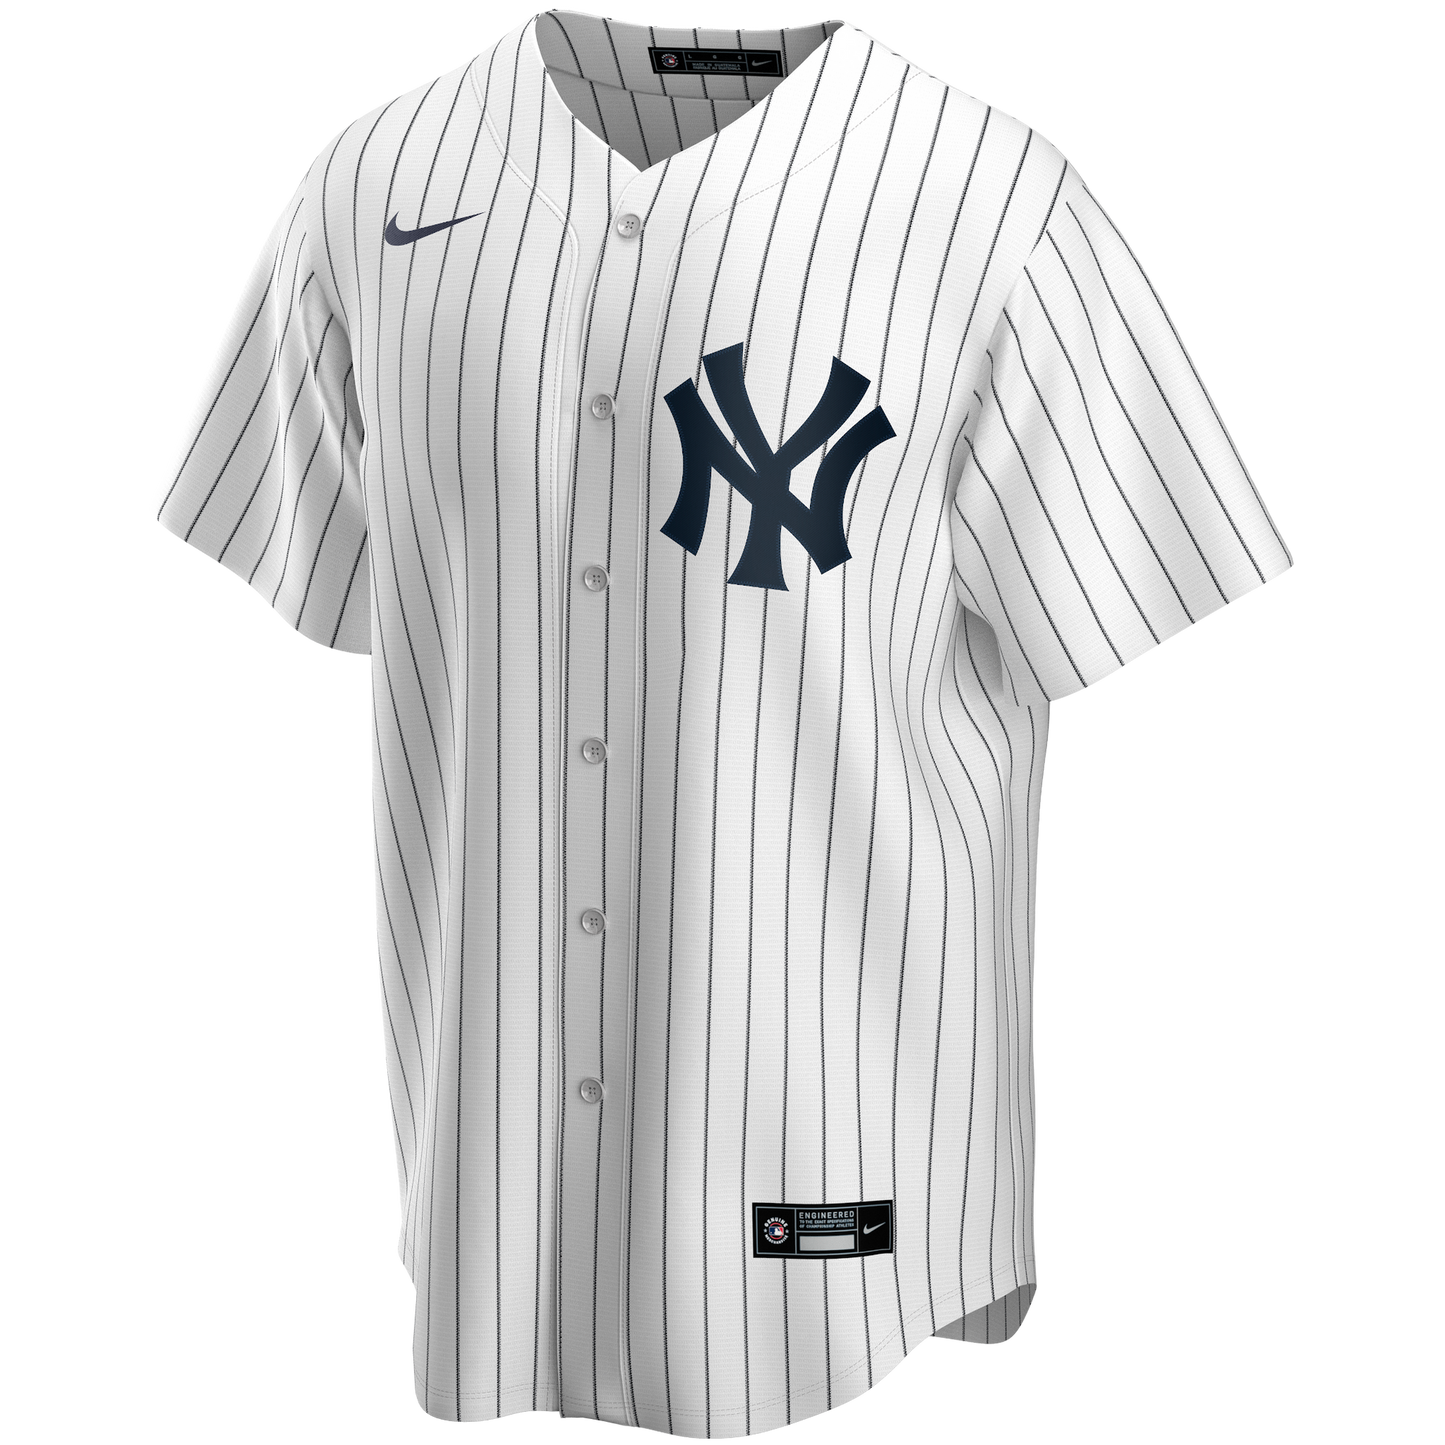 Men's Nike Gerrit Cole White New York Yankees Home Official Replica Player Jersey